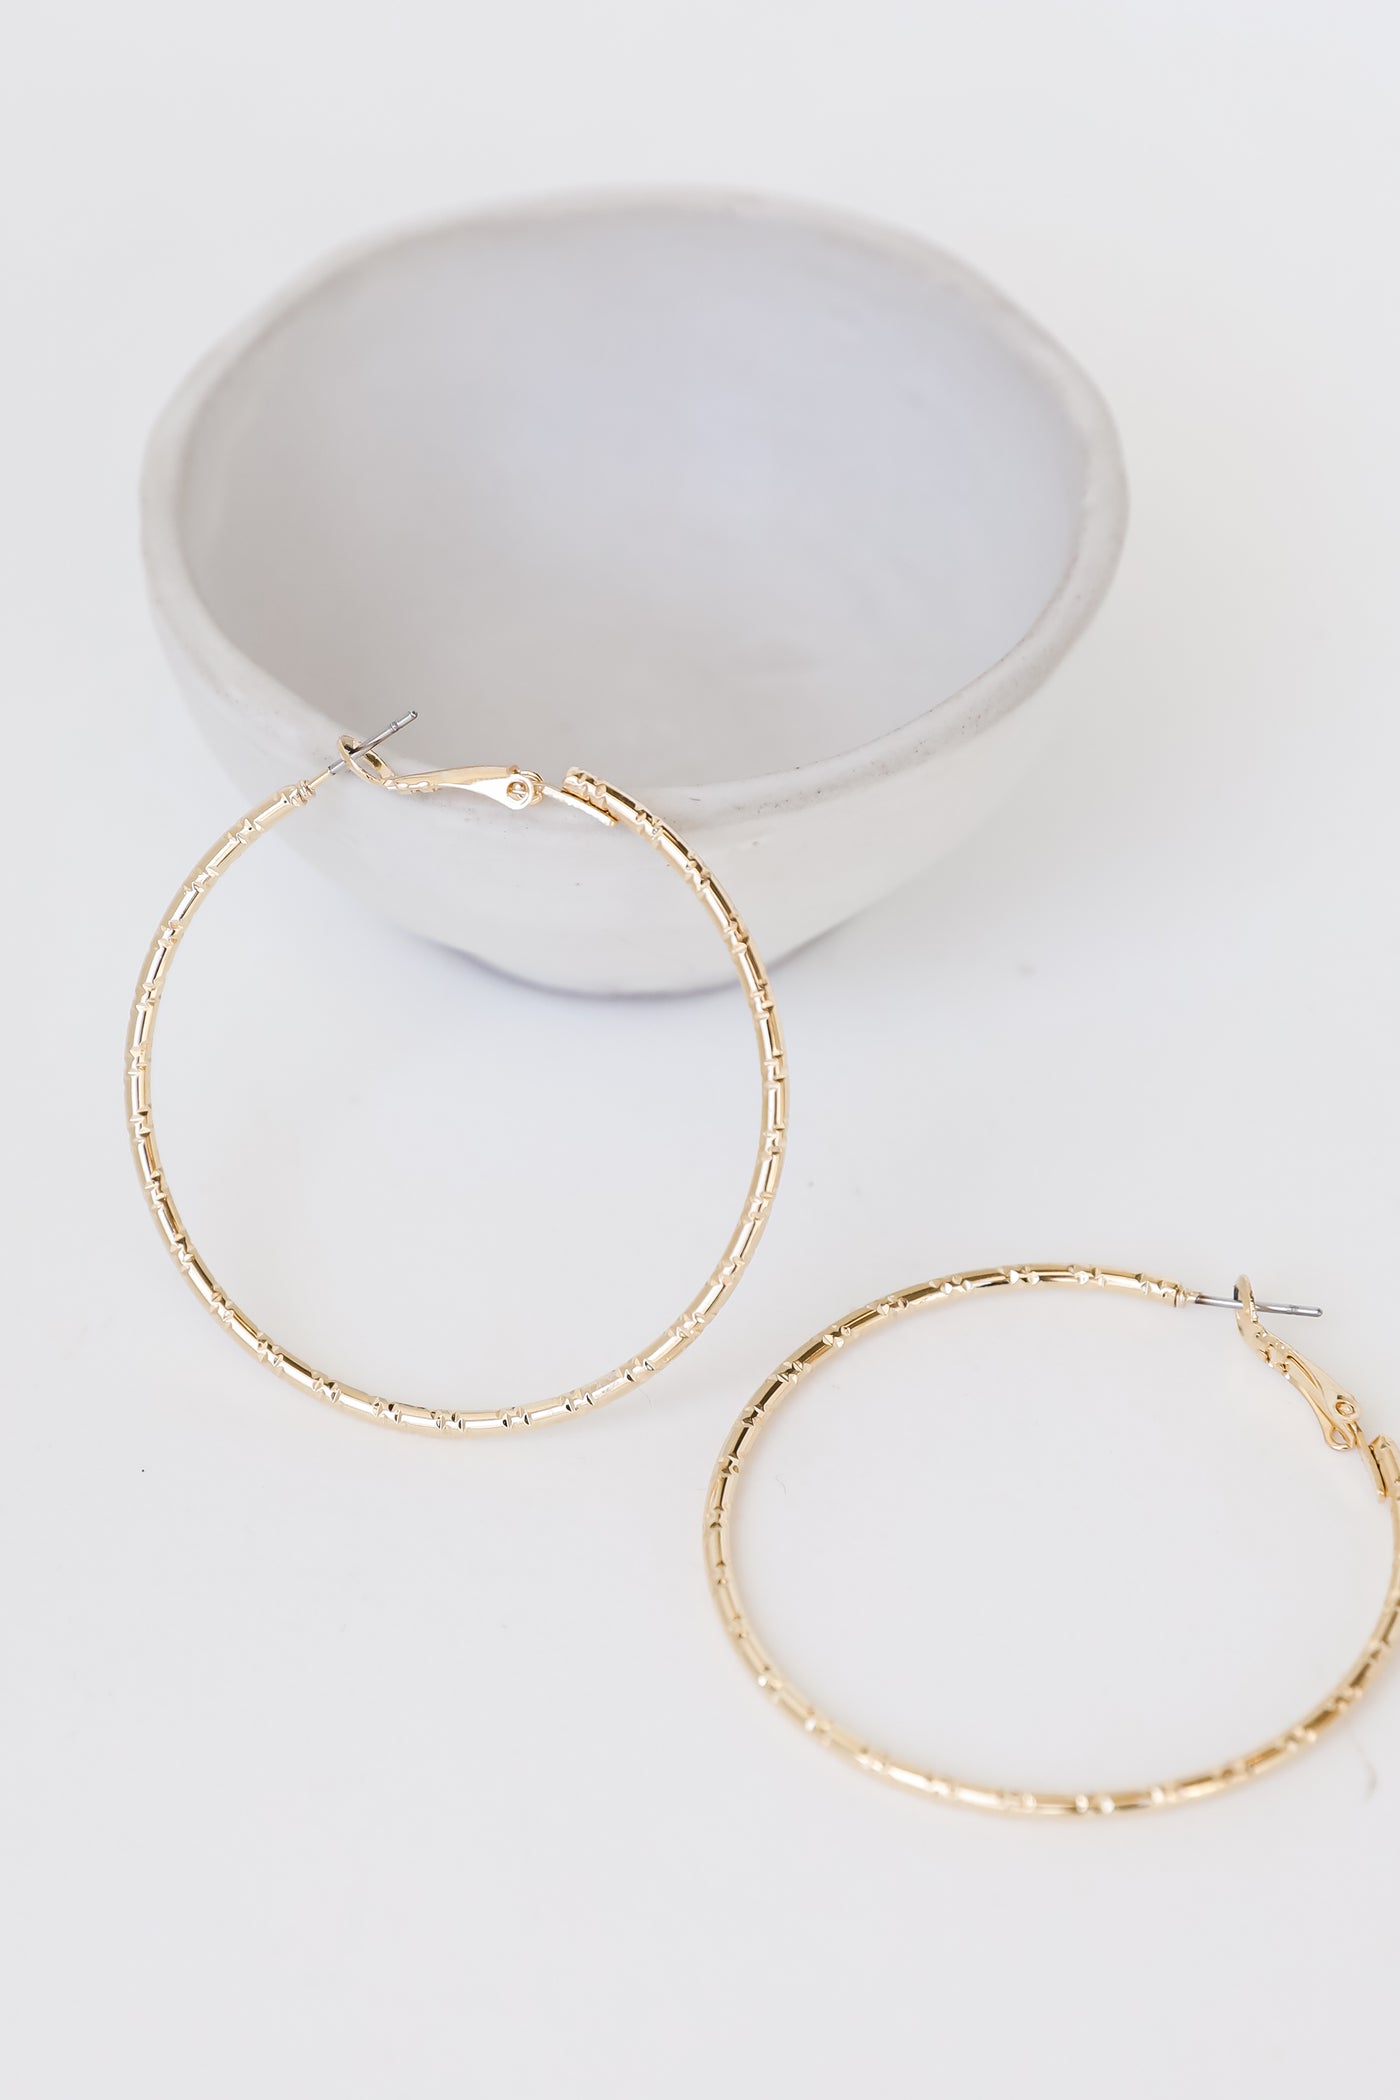 Gold Textured Hoop Earrings close up